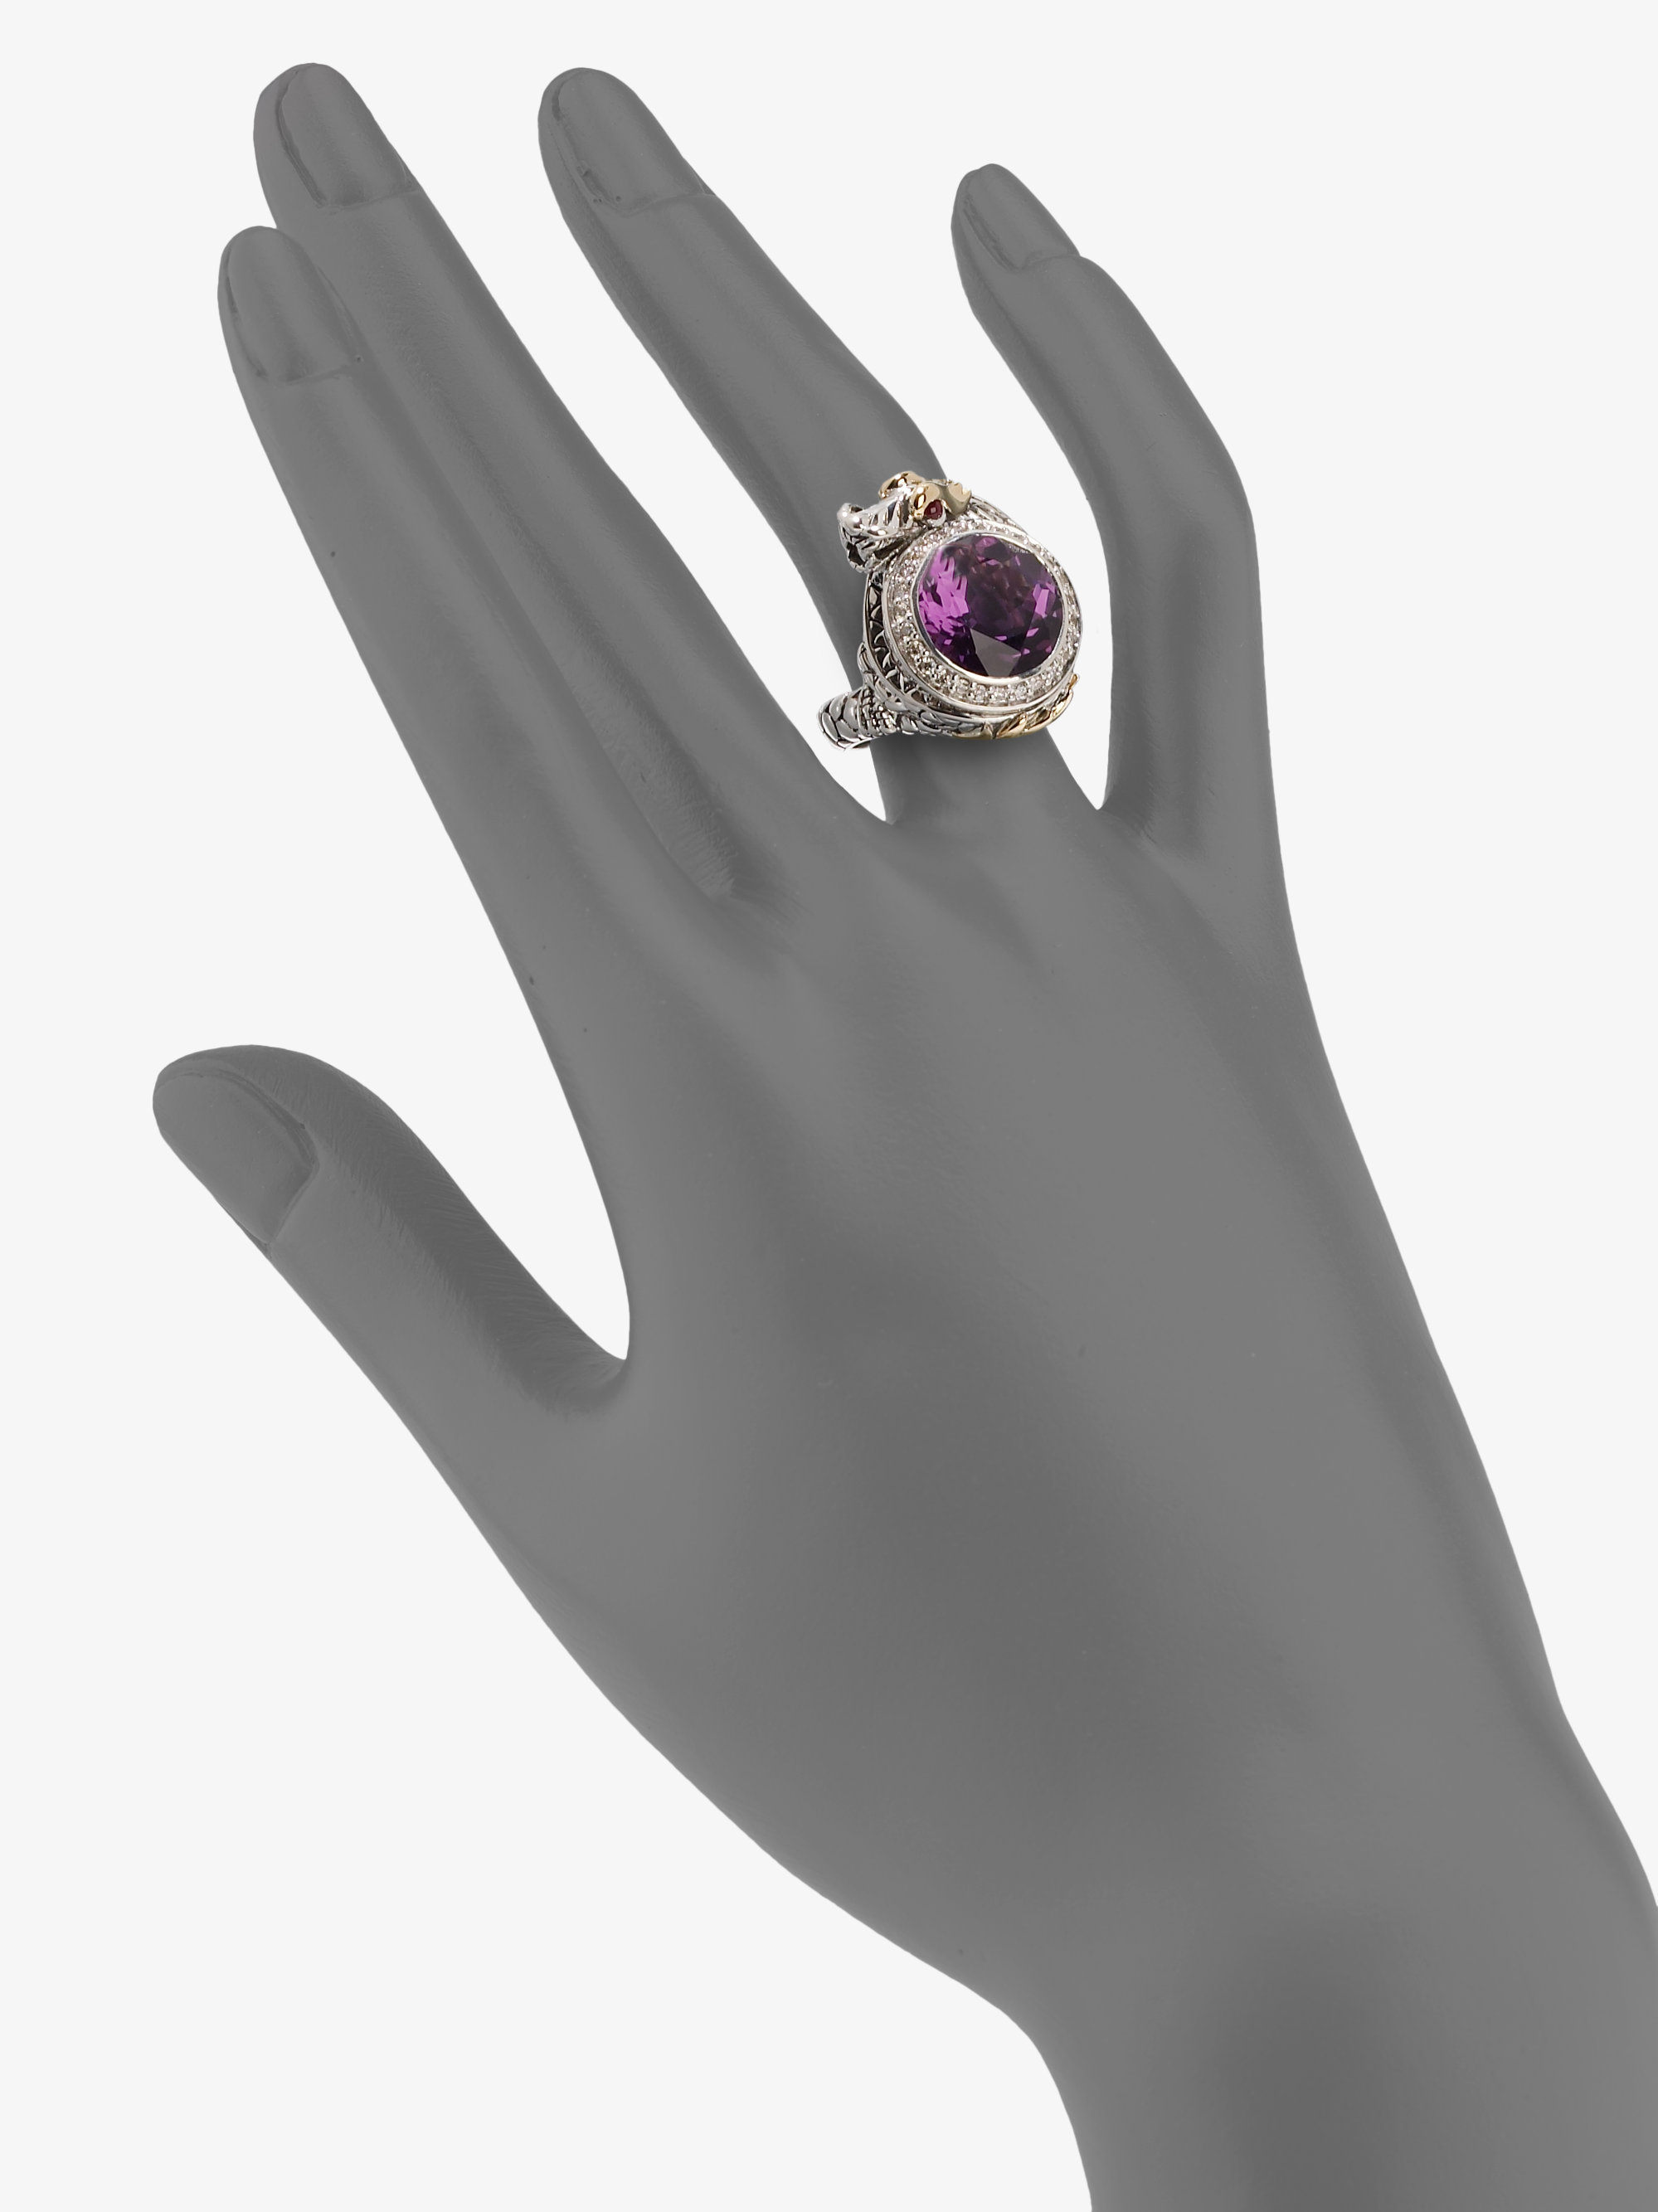 Details about   Sterling Silver Polished Amethyst Round Ring MSRP $76 